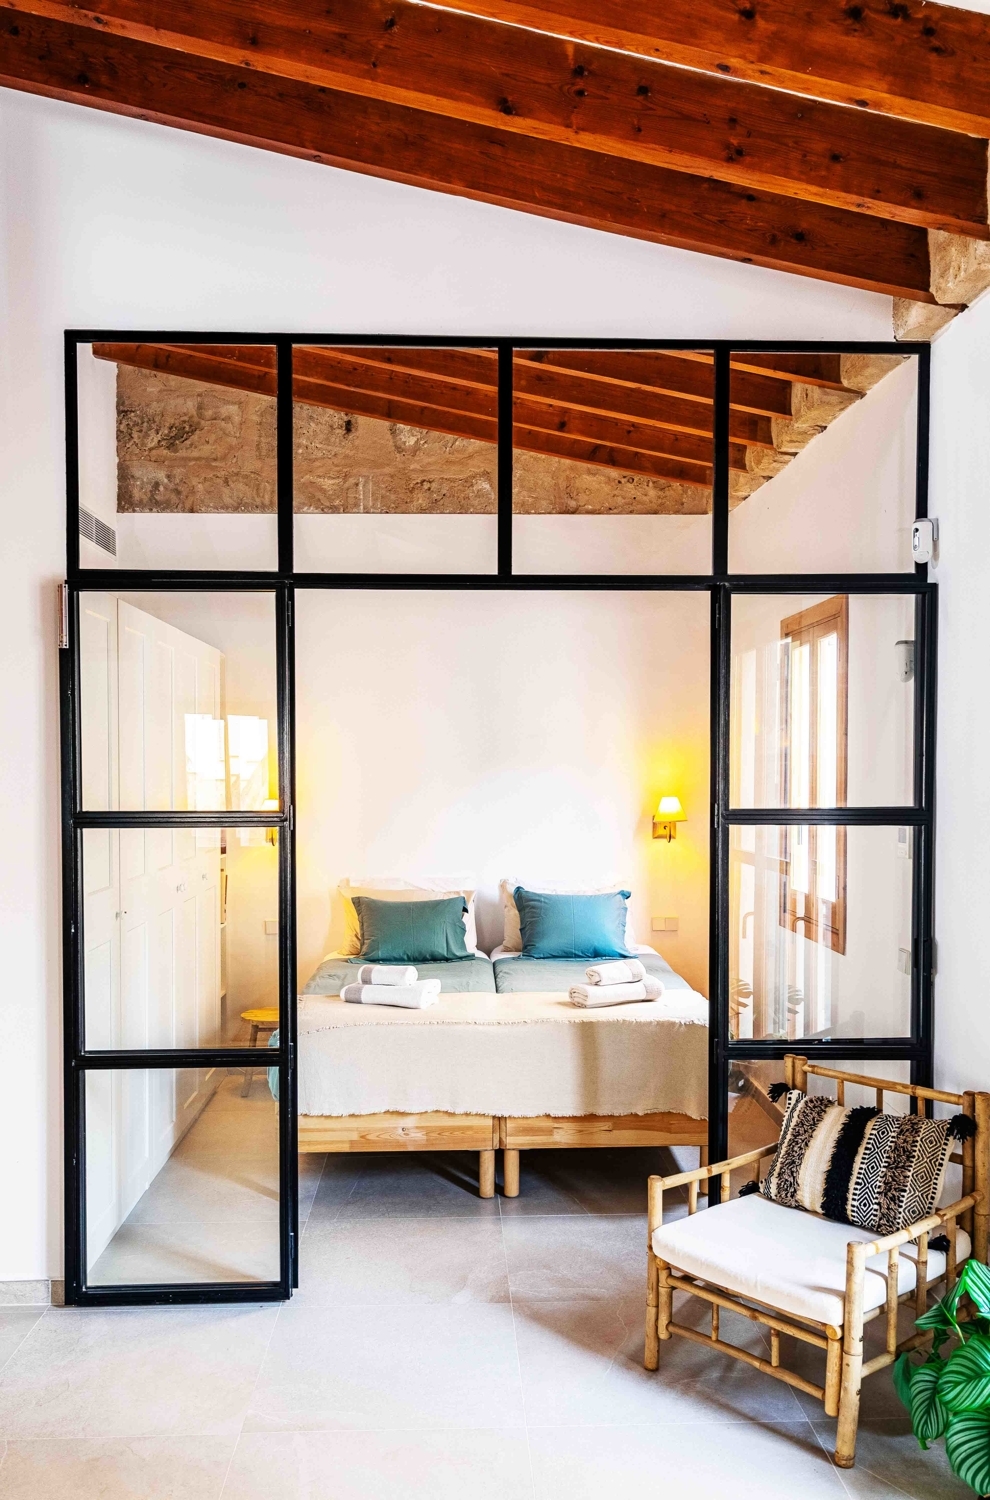 Charming renovated loft-style penthouse in Santa Catalina